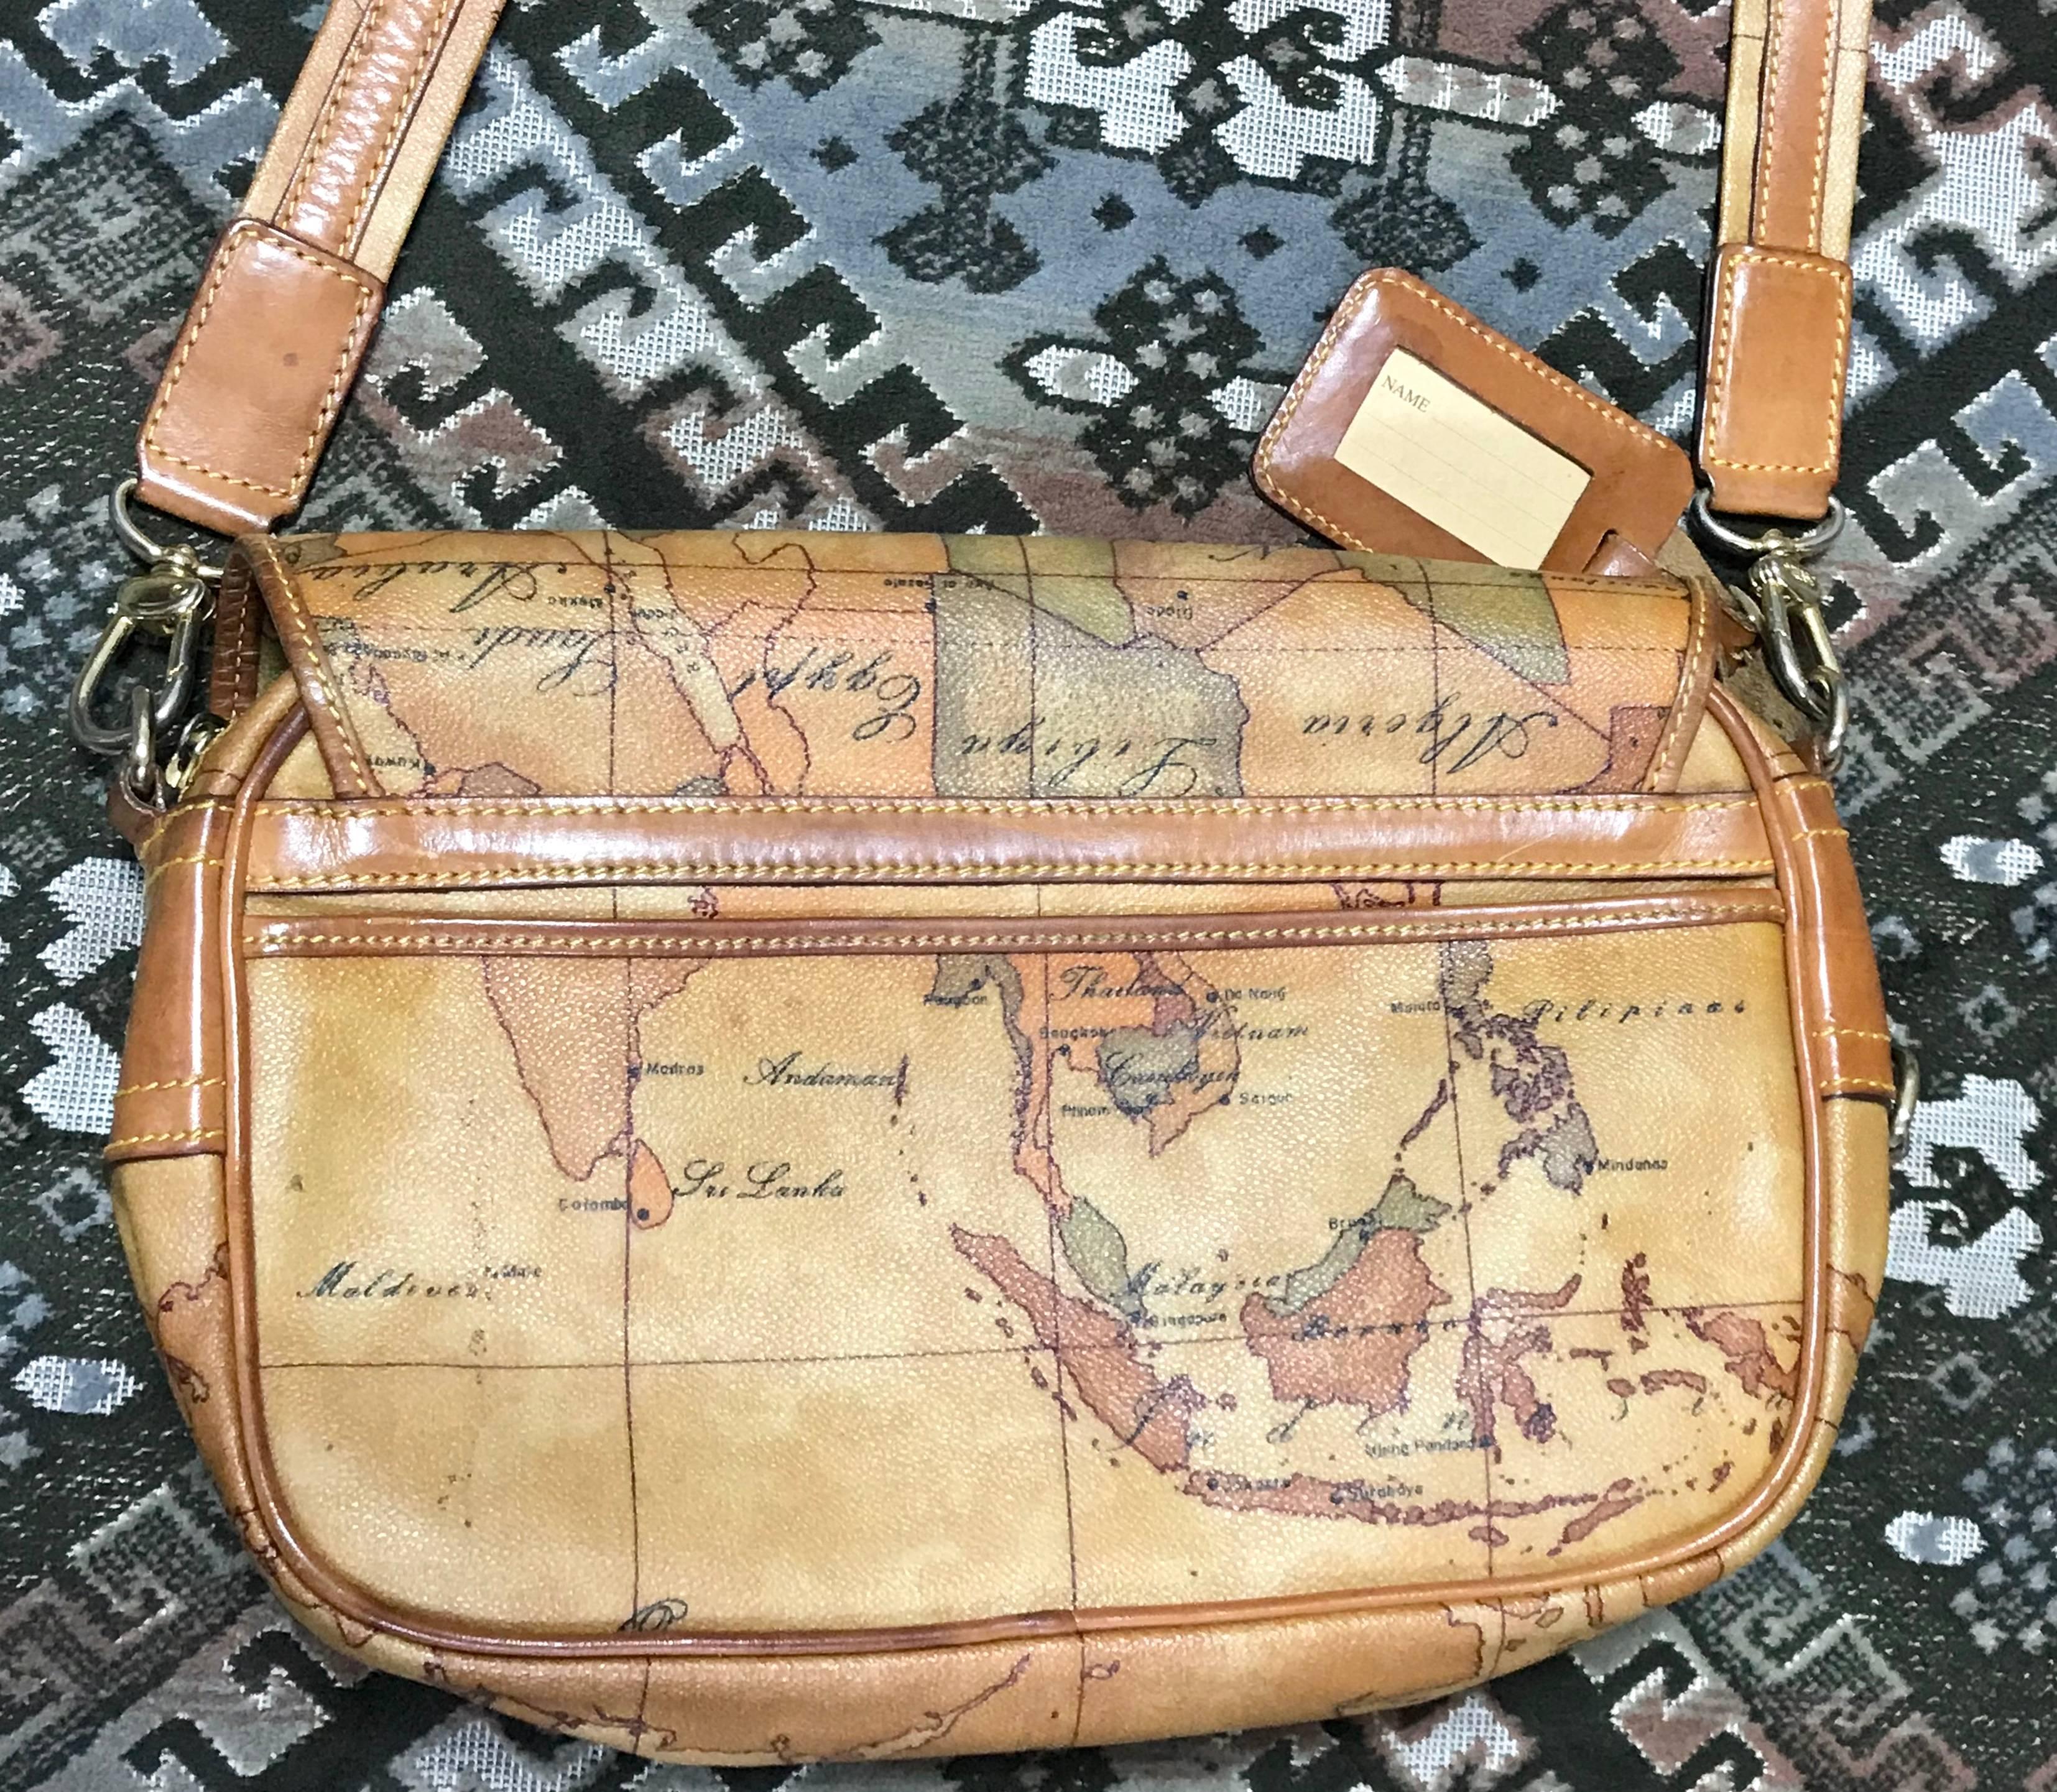 1990s. Vintage Alviero Martini  Prima Classe messenger type classic shoulder bag with a map print of Africa and Southeast Asia. Unisex use. 

Introducing another classic and daily use vintage shoulder bag from Alviero Martini, PRIMA CLASSE back in